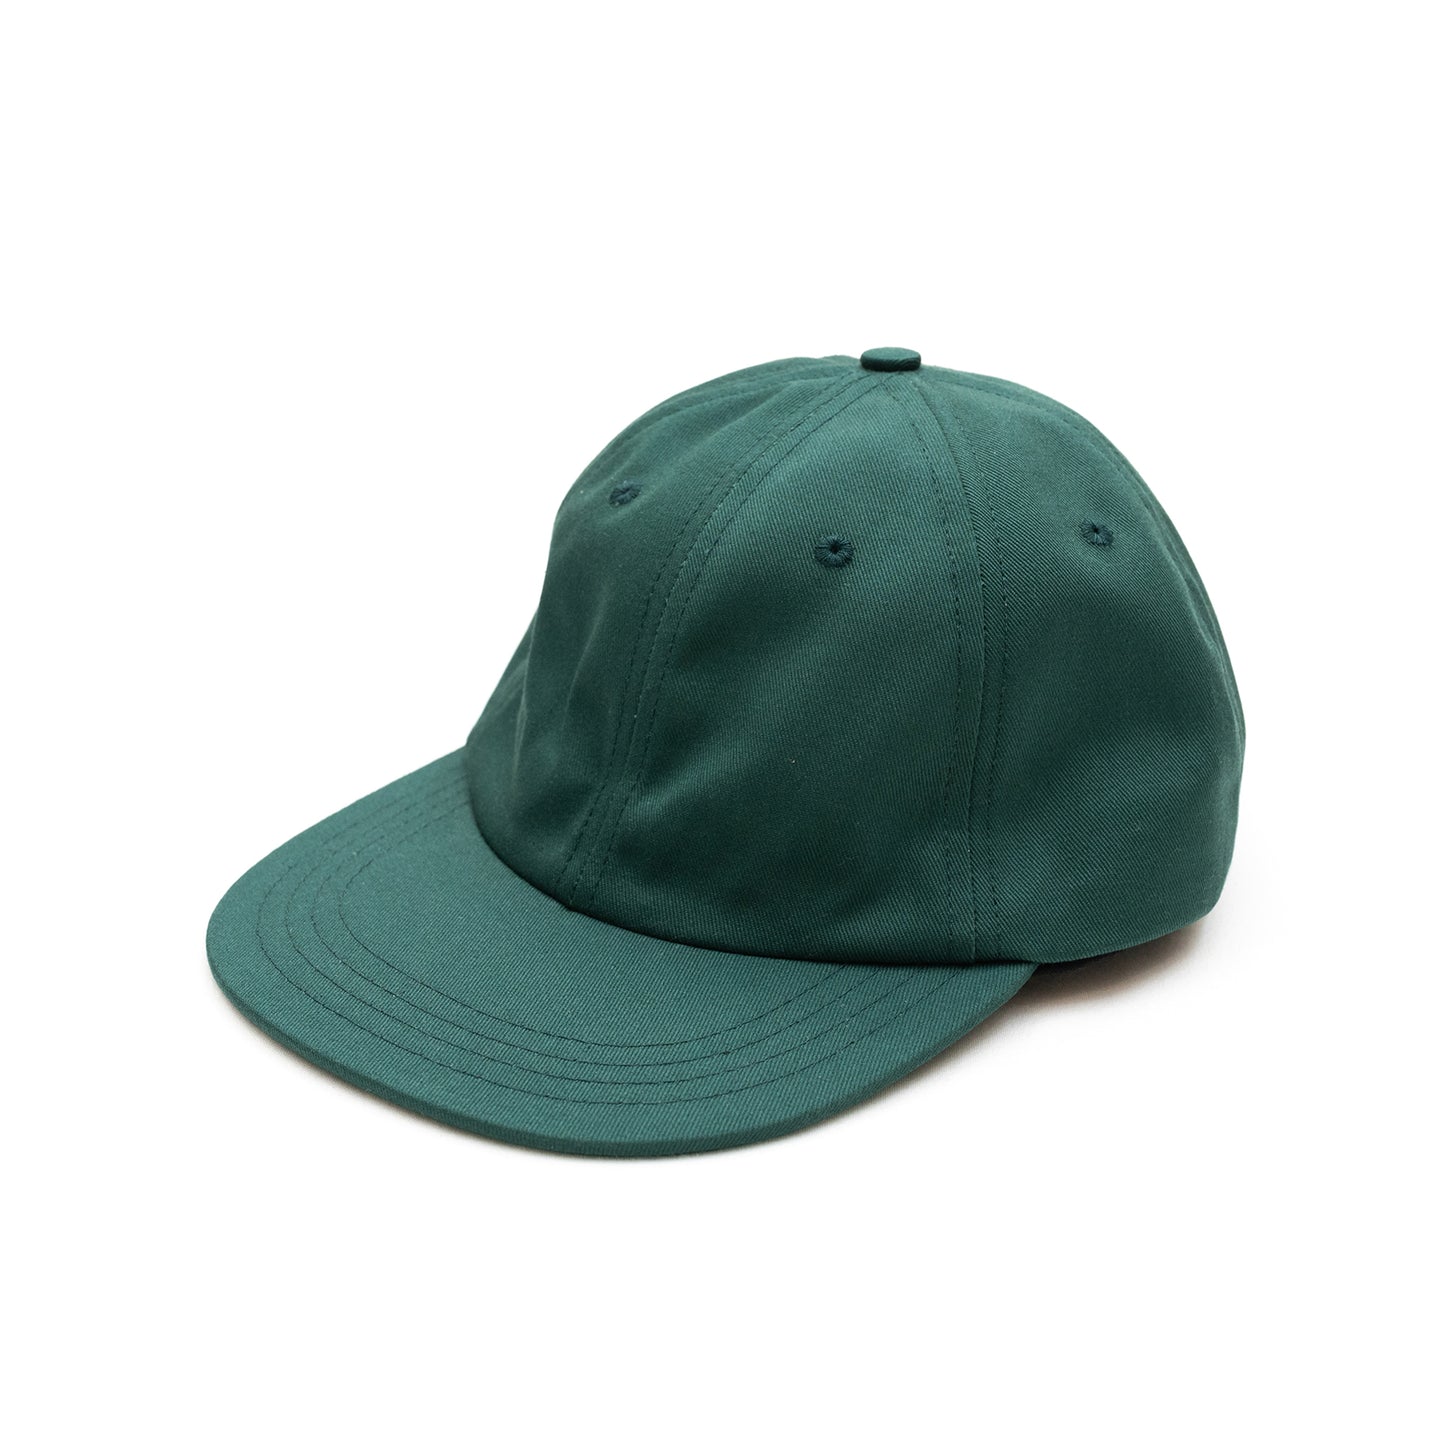 COOPERS TOWN BALLCAP SOLID WASHED CAP - GREEN